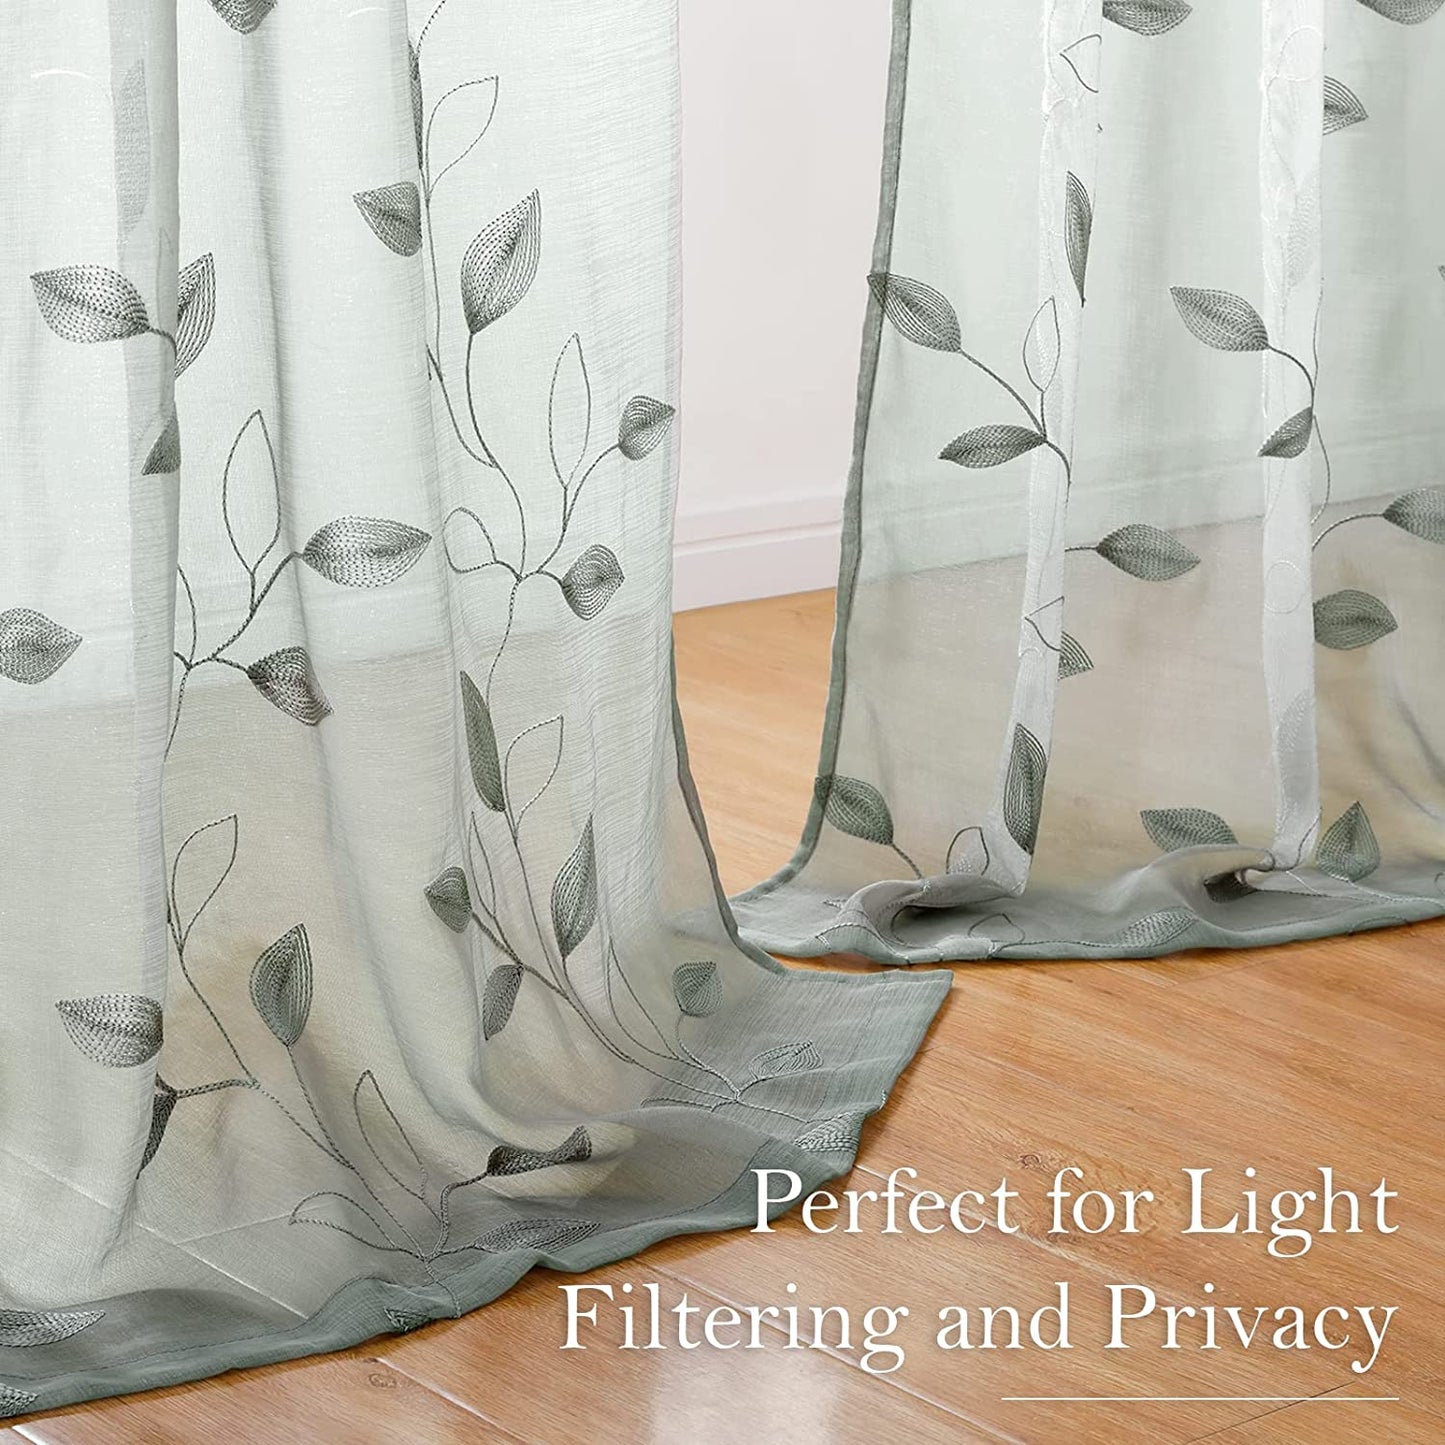 HOMEIDEAS Sage Green Sheer Curtains 52 X 63 Inches Length 2 Panels Embroidered Leaf Pattern Pocket Faux Linen Floral Semi Sheer Voile Window Curtains/Drapes for Bedroom Living Room  HOMEIDEAS   